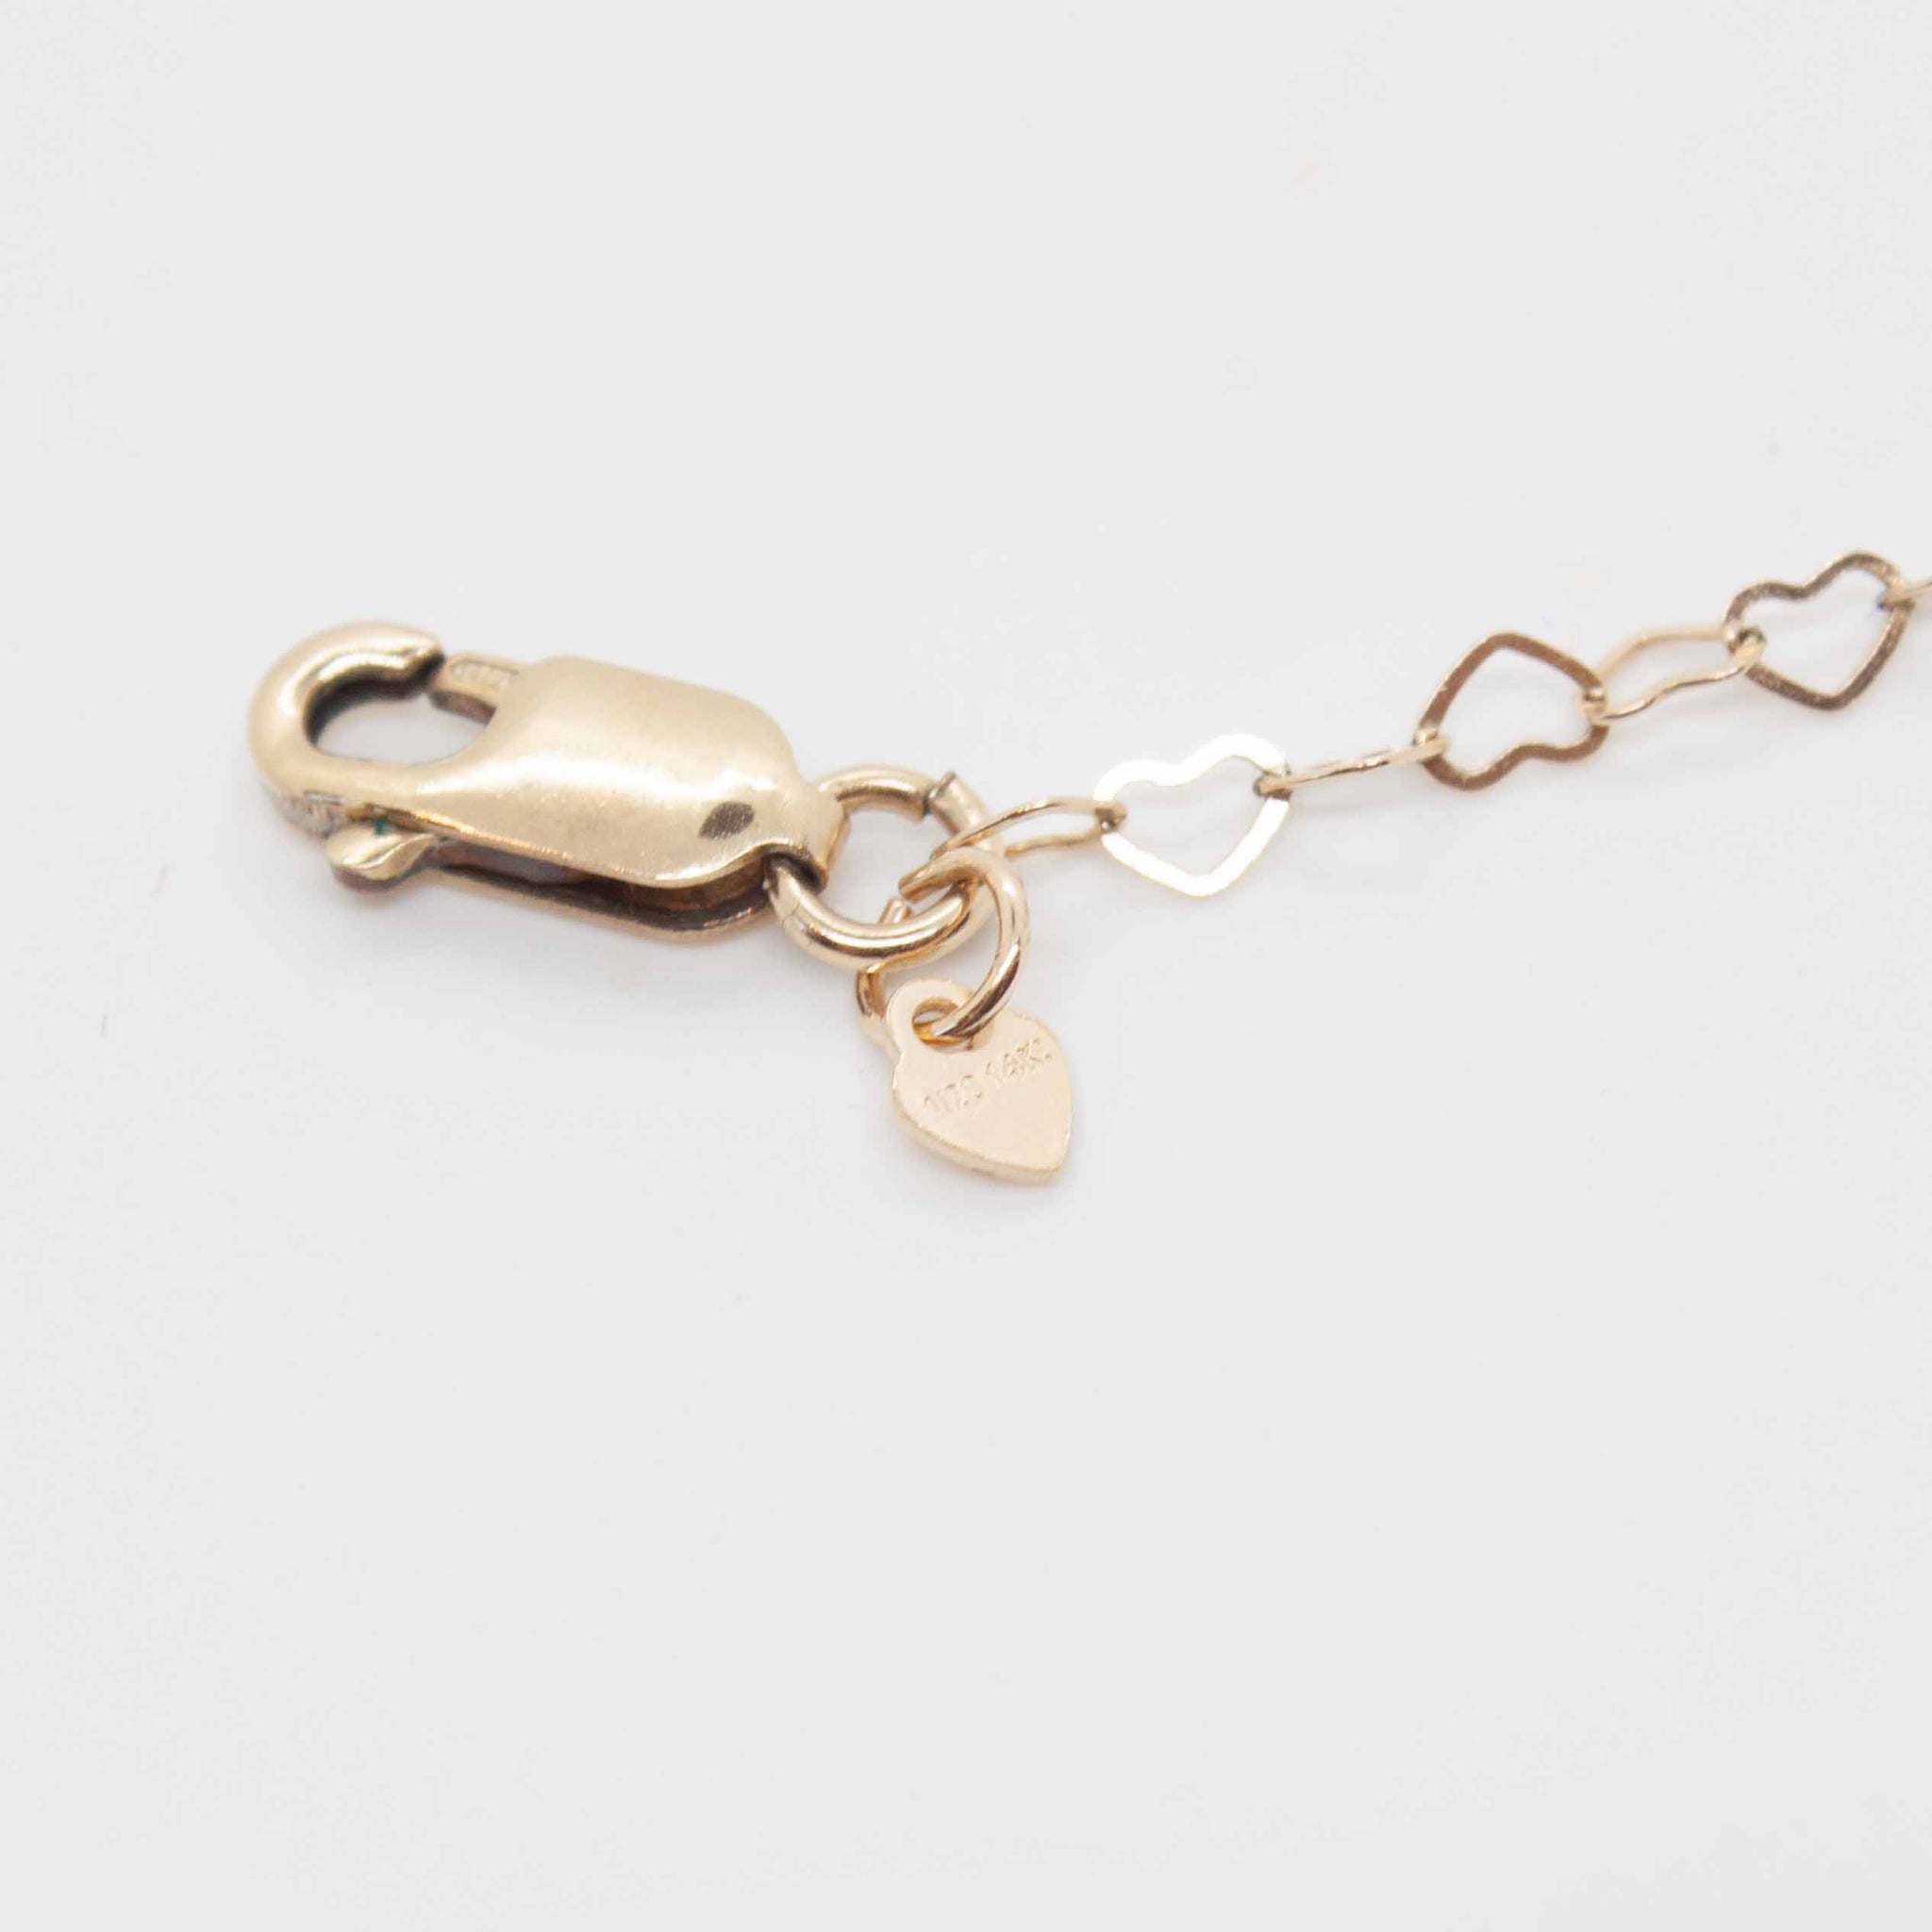 18 inch 14 karat gold filled mini heart bracelet, finished with a delicate solid heart at the clasp.